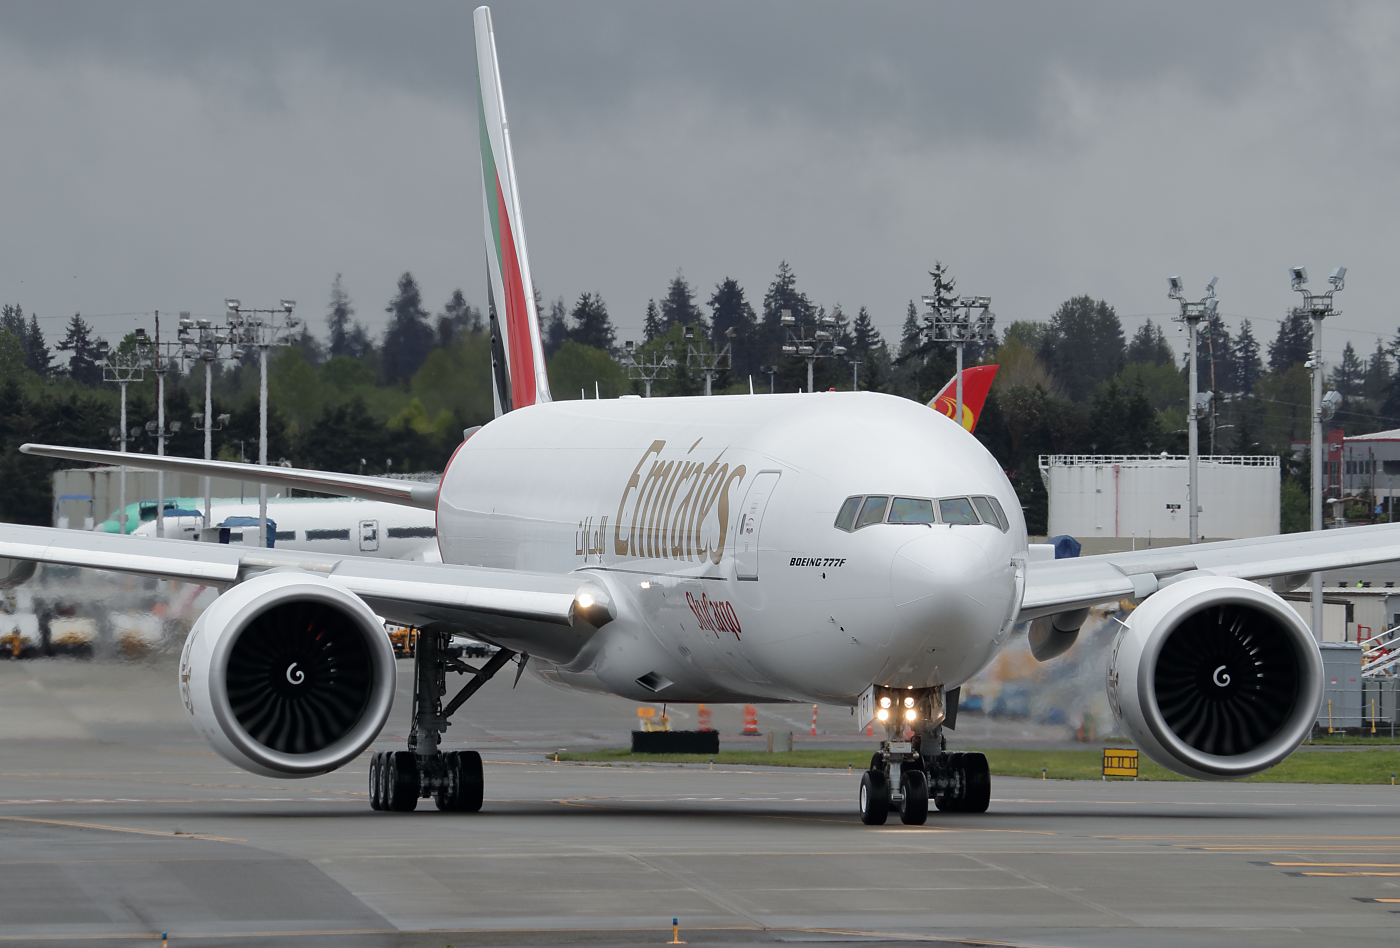 Emirates Sky Cargo 777F A6-EFT at KPAE Paine Field